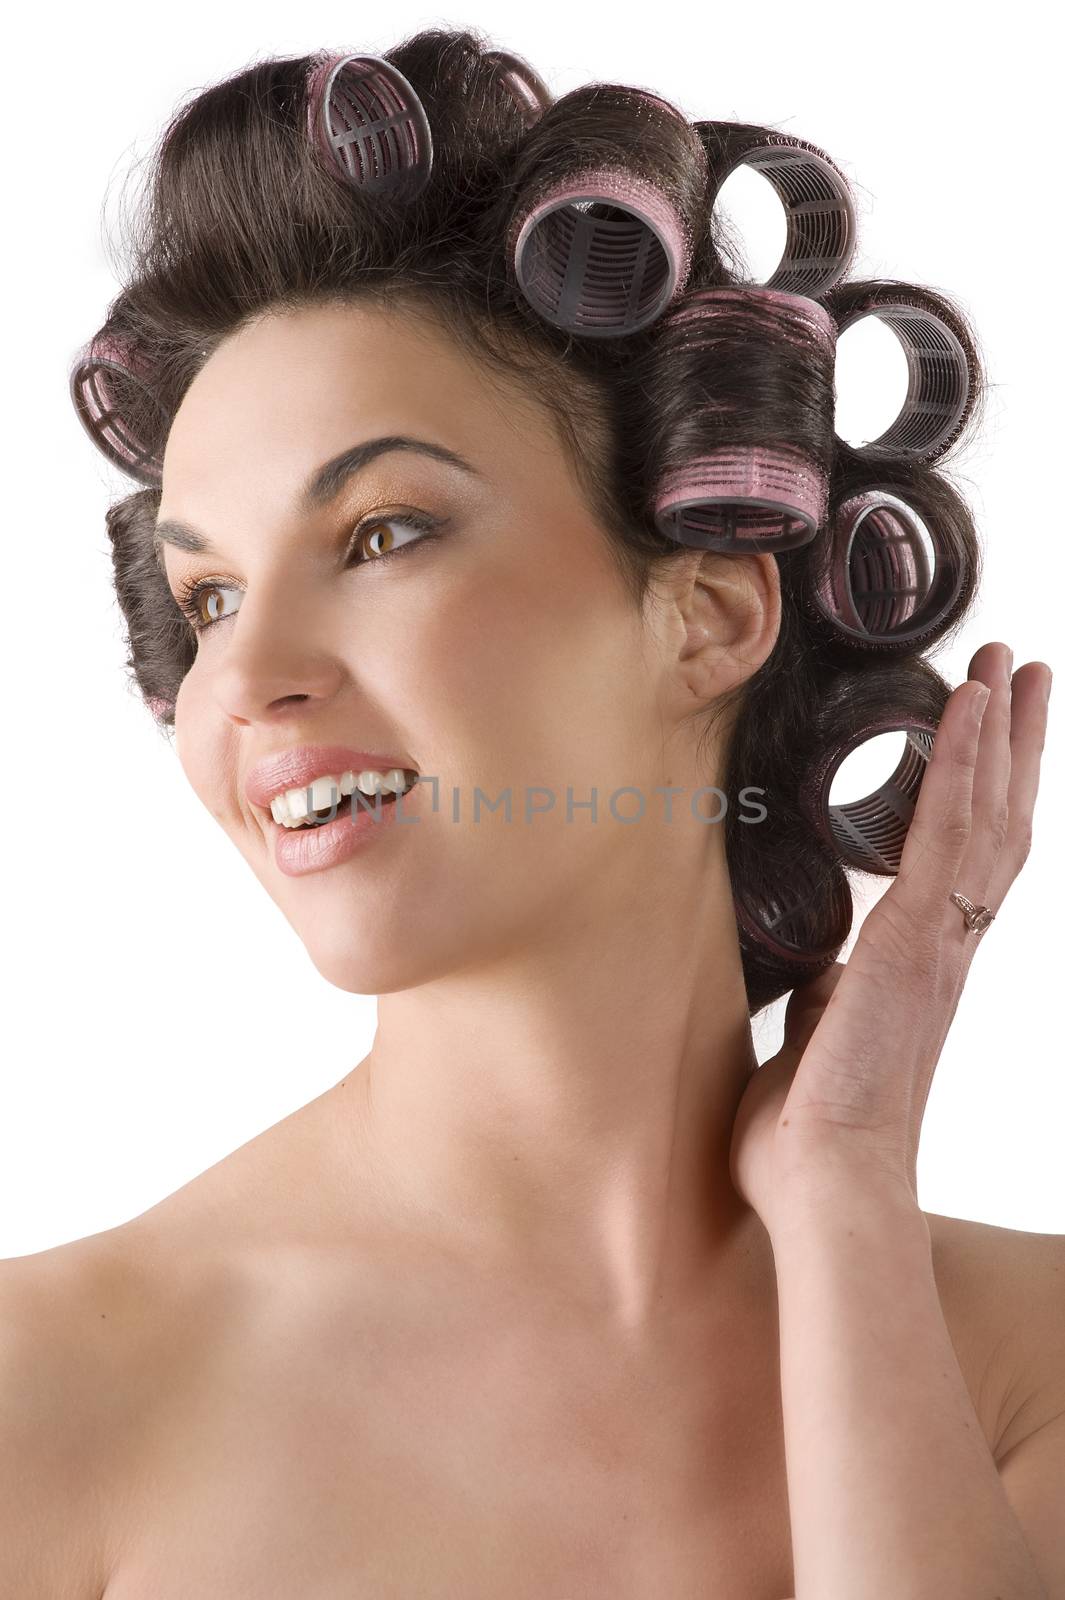 smiling portrait of young beautiful girl having hair curlers on her head isolated on white background